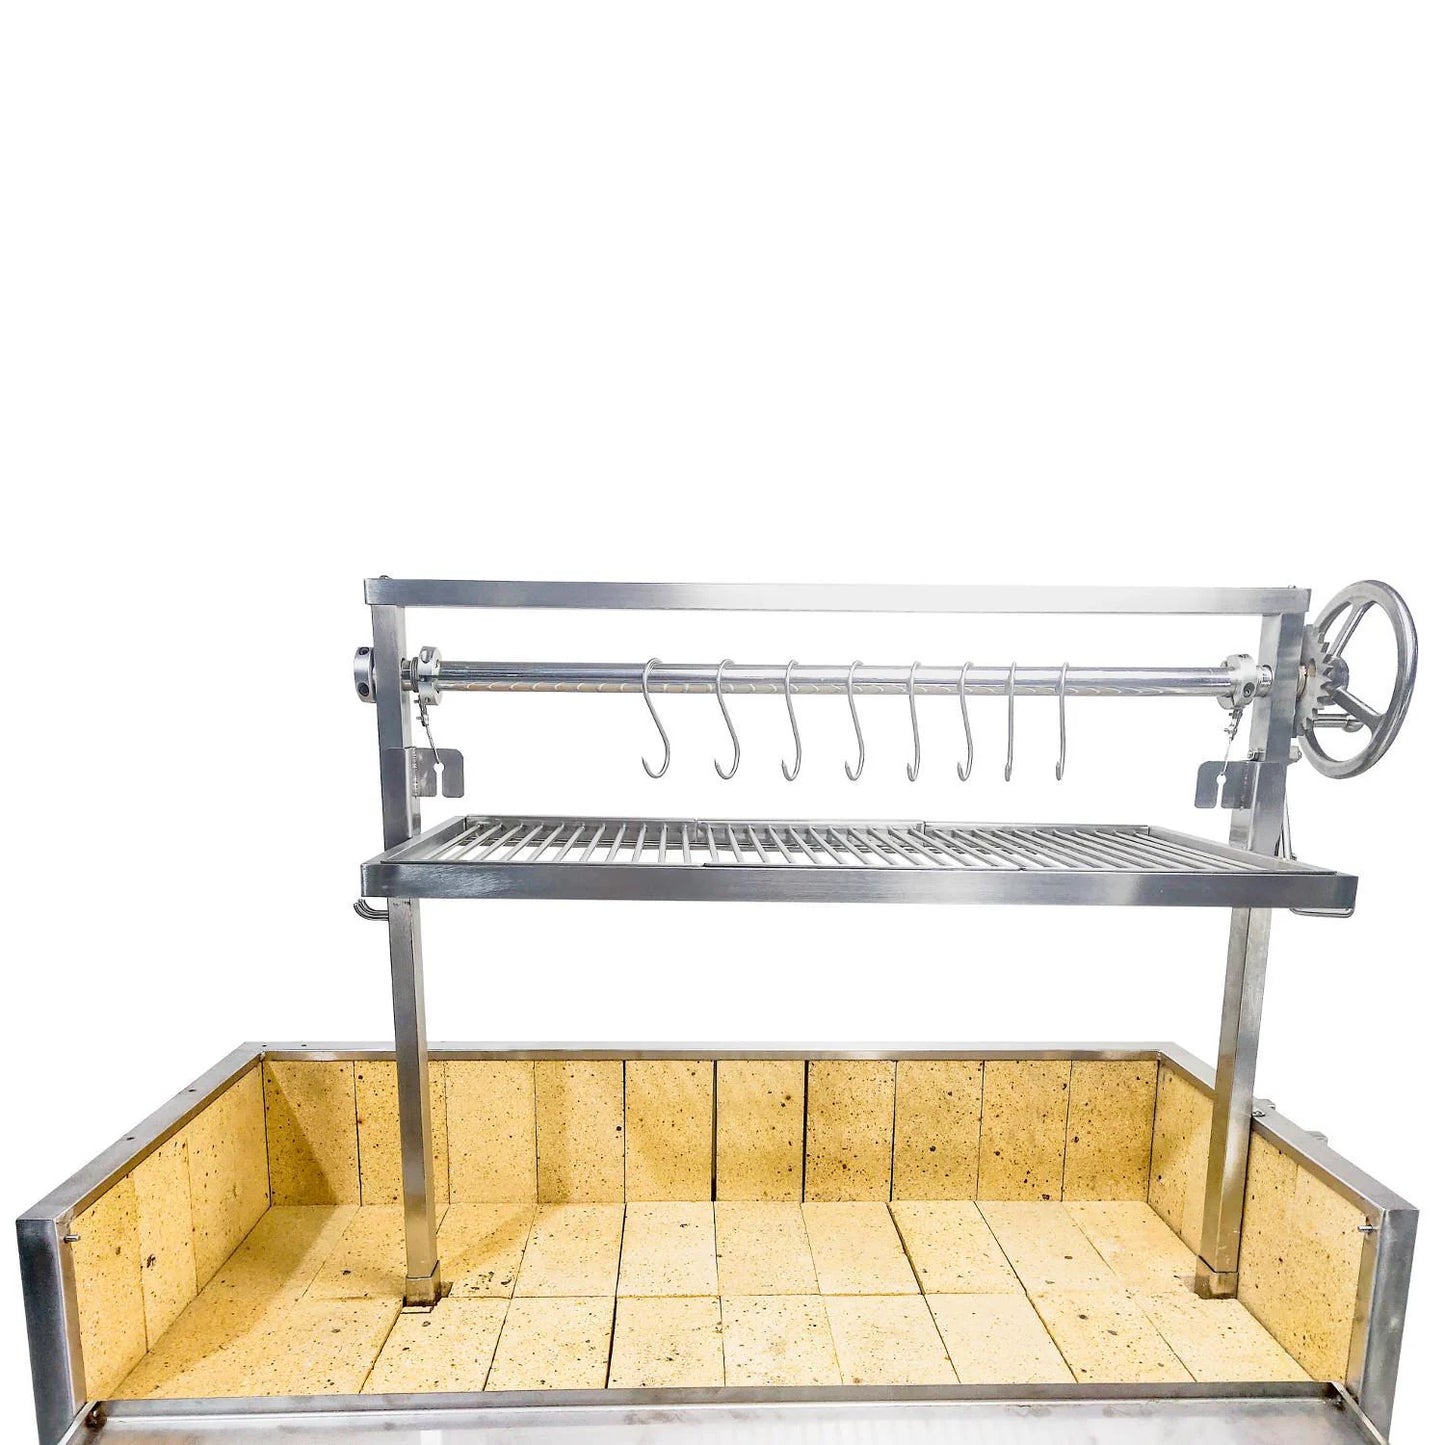 Tagwood BBQ Fully Assembled Argentine Santa Maria Wood Fire & Charcoal Grill - All Stainless Steel - BBQ03SSF